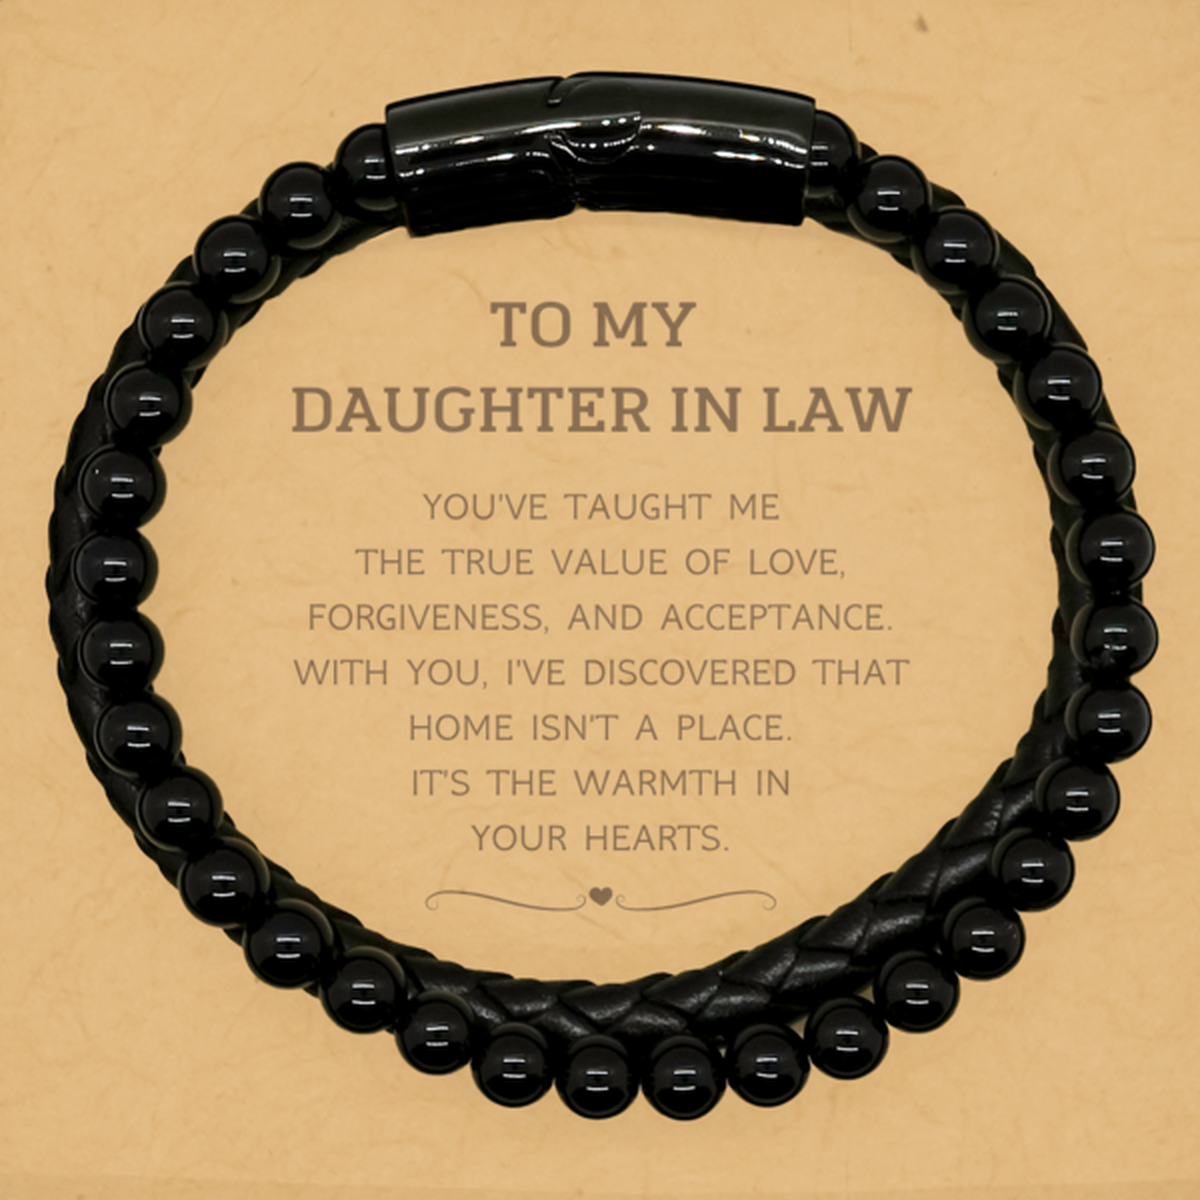 To My Daughter In Law Gifts, You've taught me the true value of love, Thank You Gifts For Daughter In Law, Birthday Stone Leather Bracelets For Daughter In Law